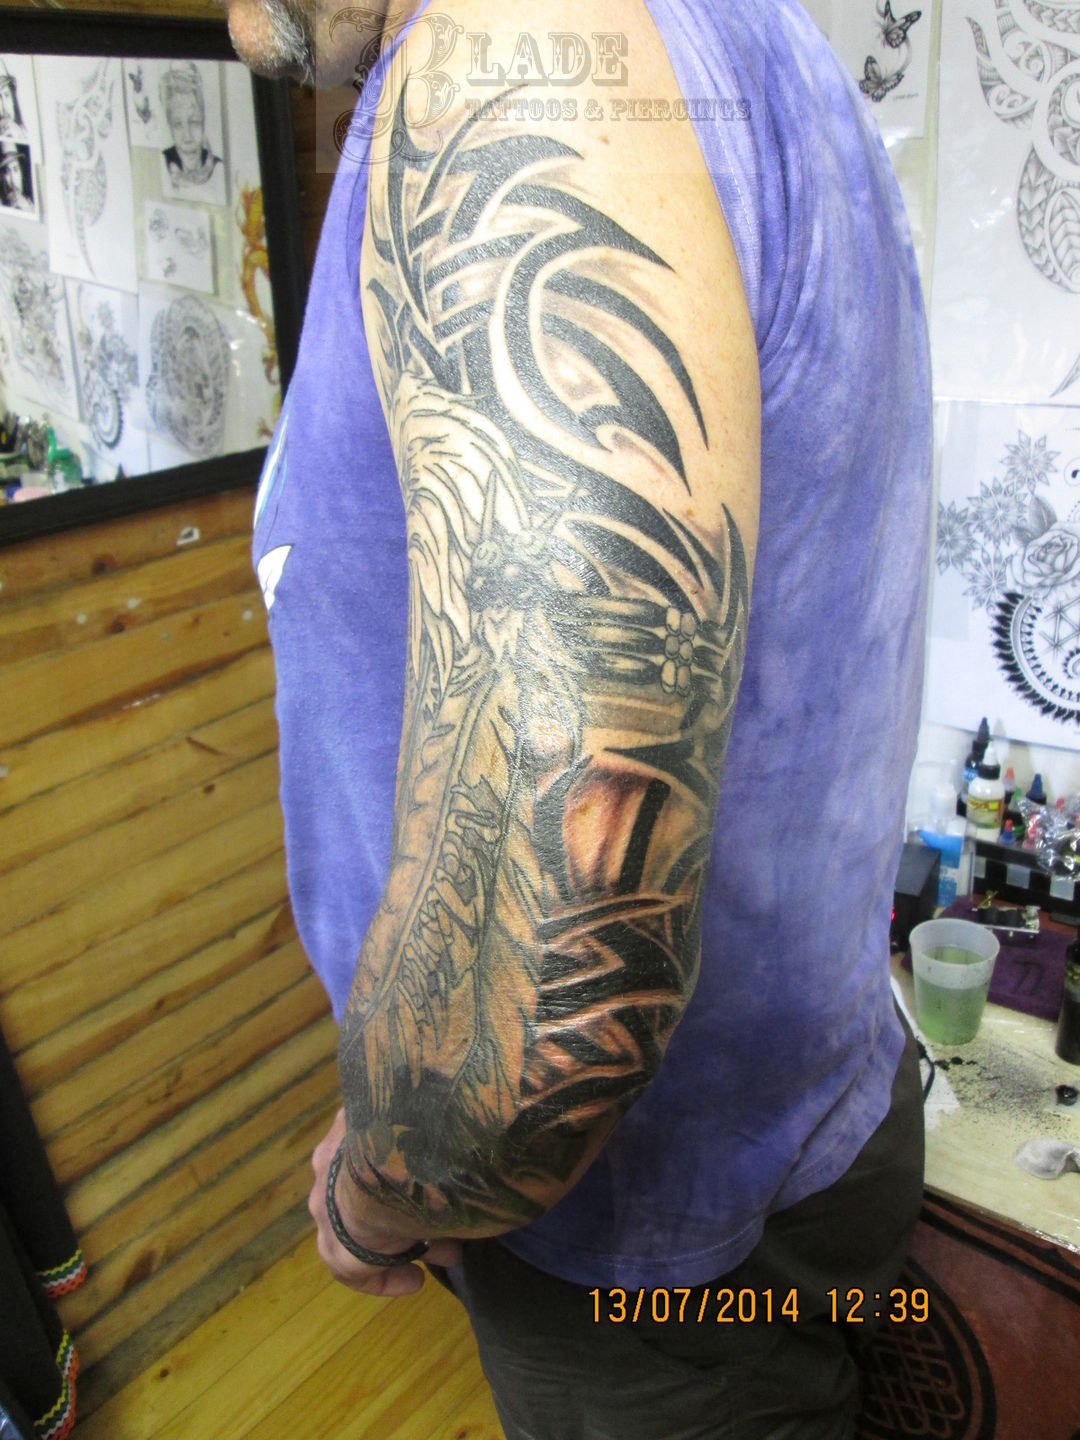 Solid Arm Band Tattoo for Men - Black Poison Tattoos